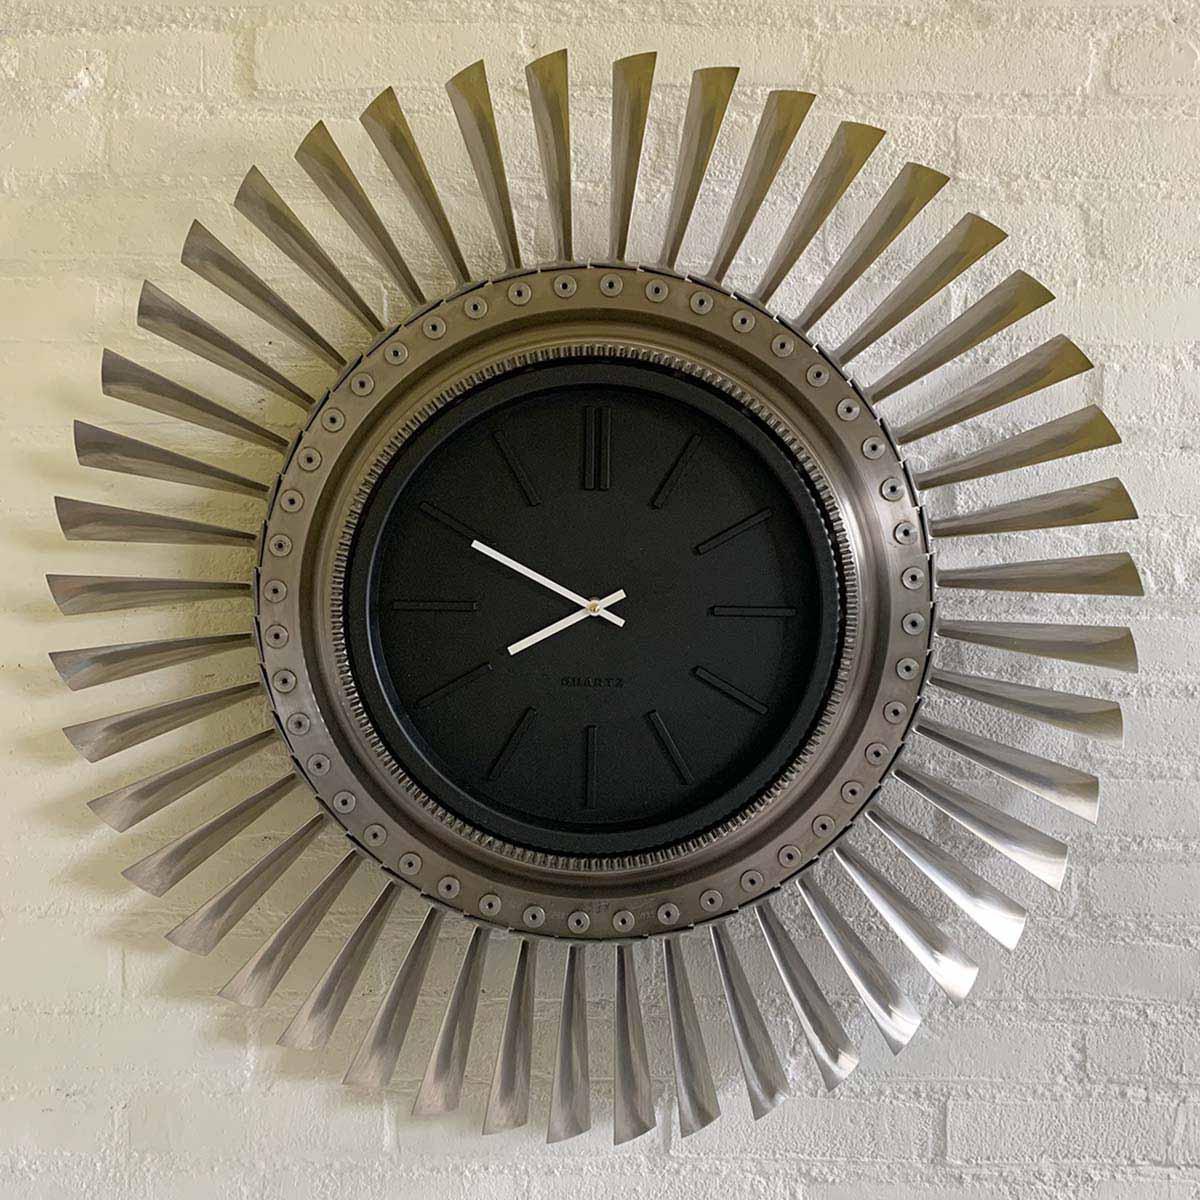 Clock made from parts of the engine of a Su-22 Fitter aircraft for sale.